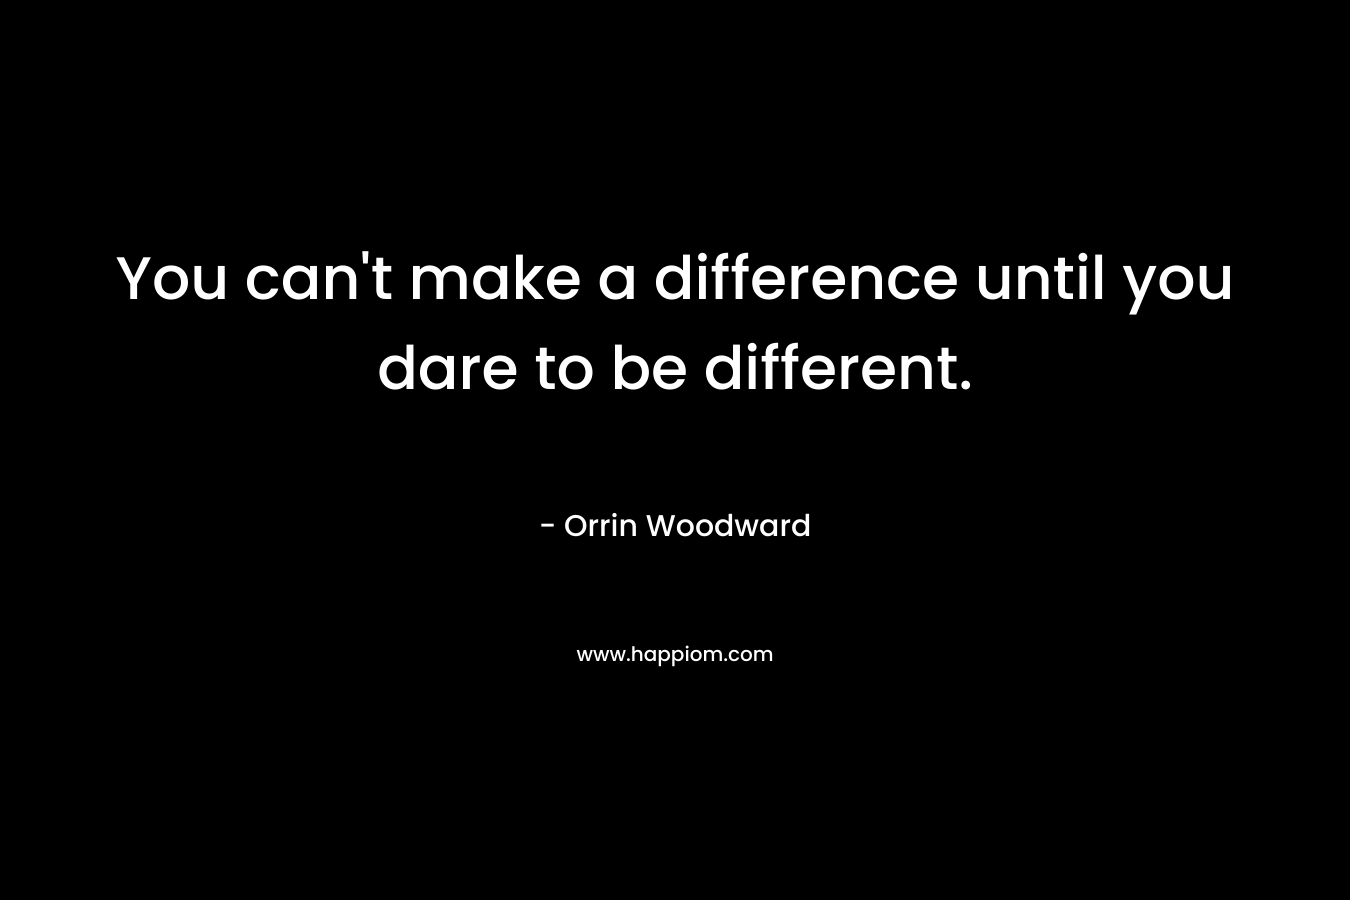 You can't make a difference until you dare to be different.